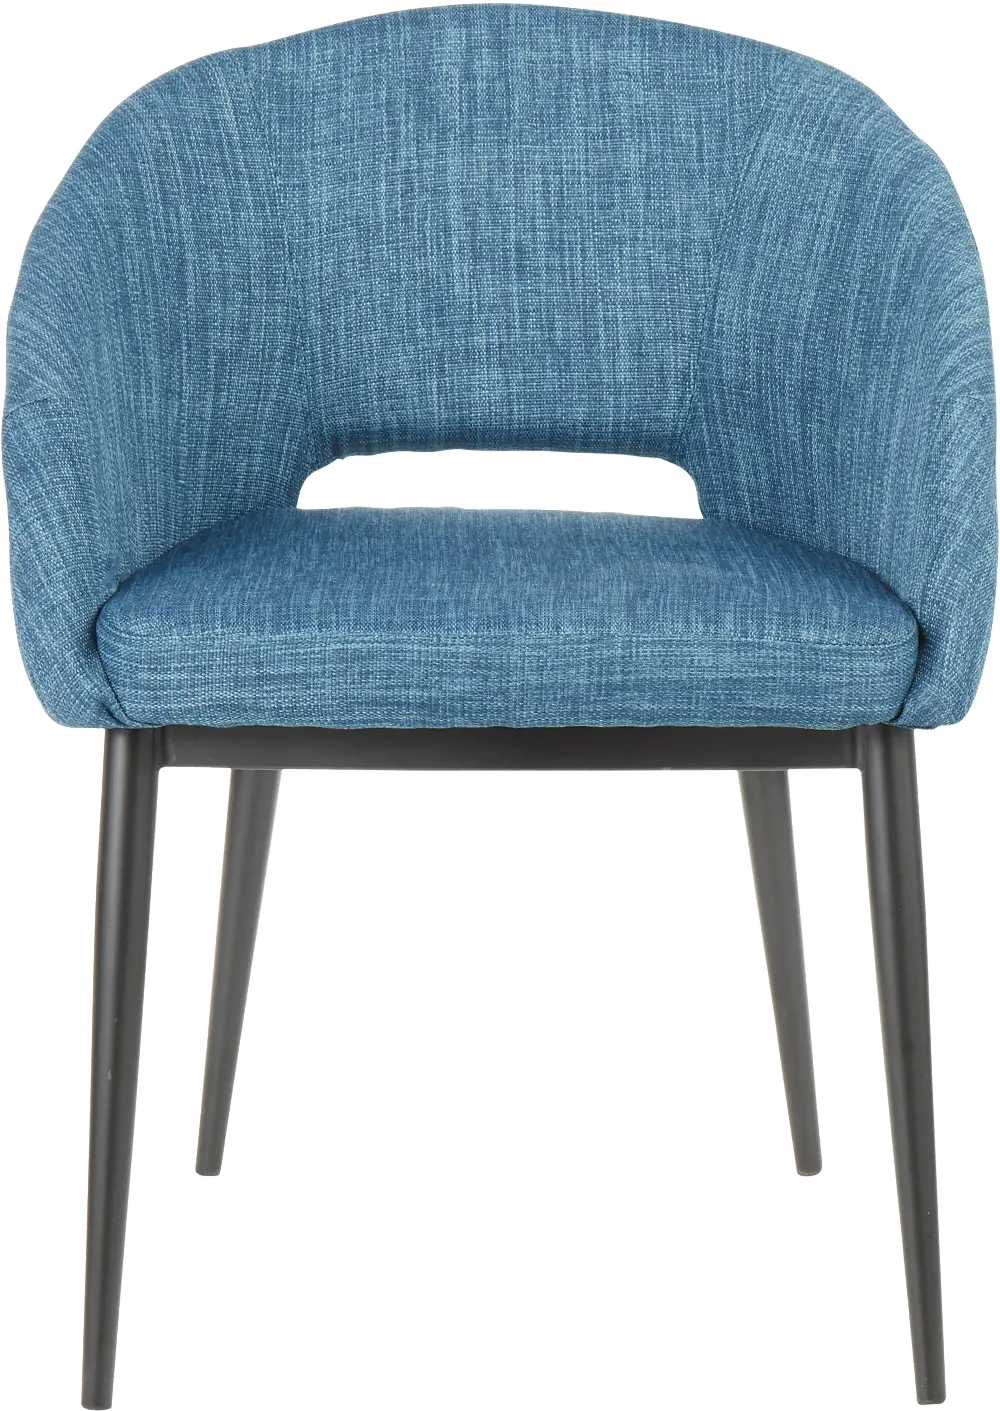 CH-RENEE-BKBU Contemporary Blue and Black Upholstered Dining Room Chair - Renee-1